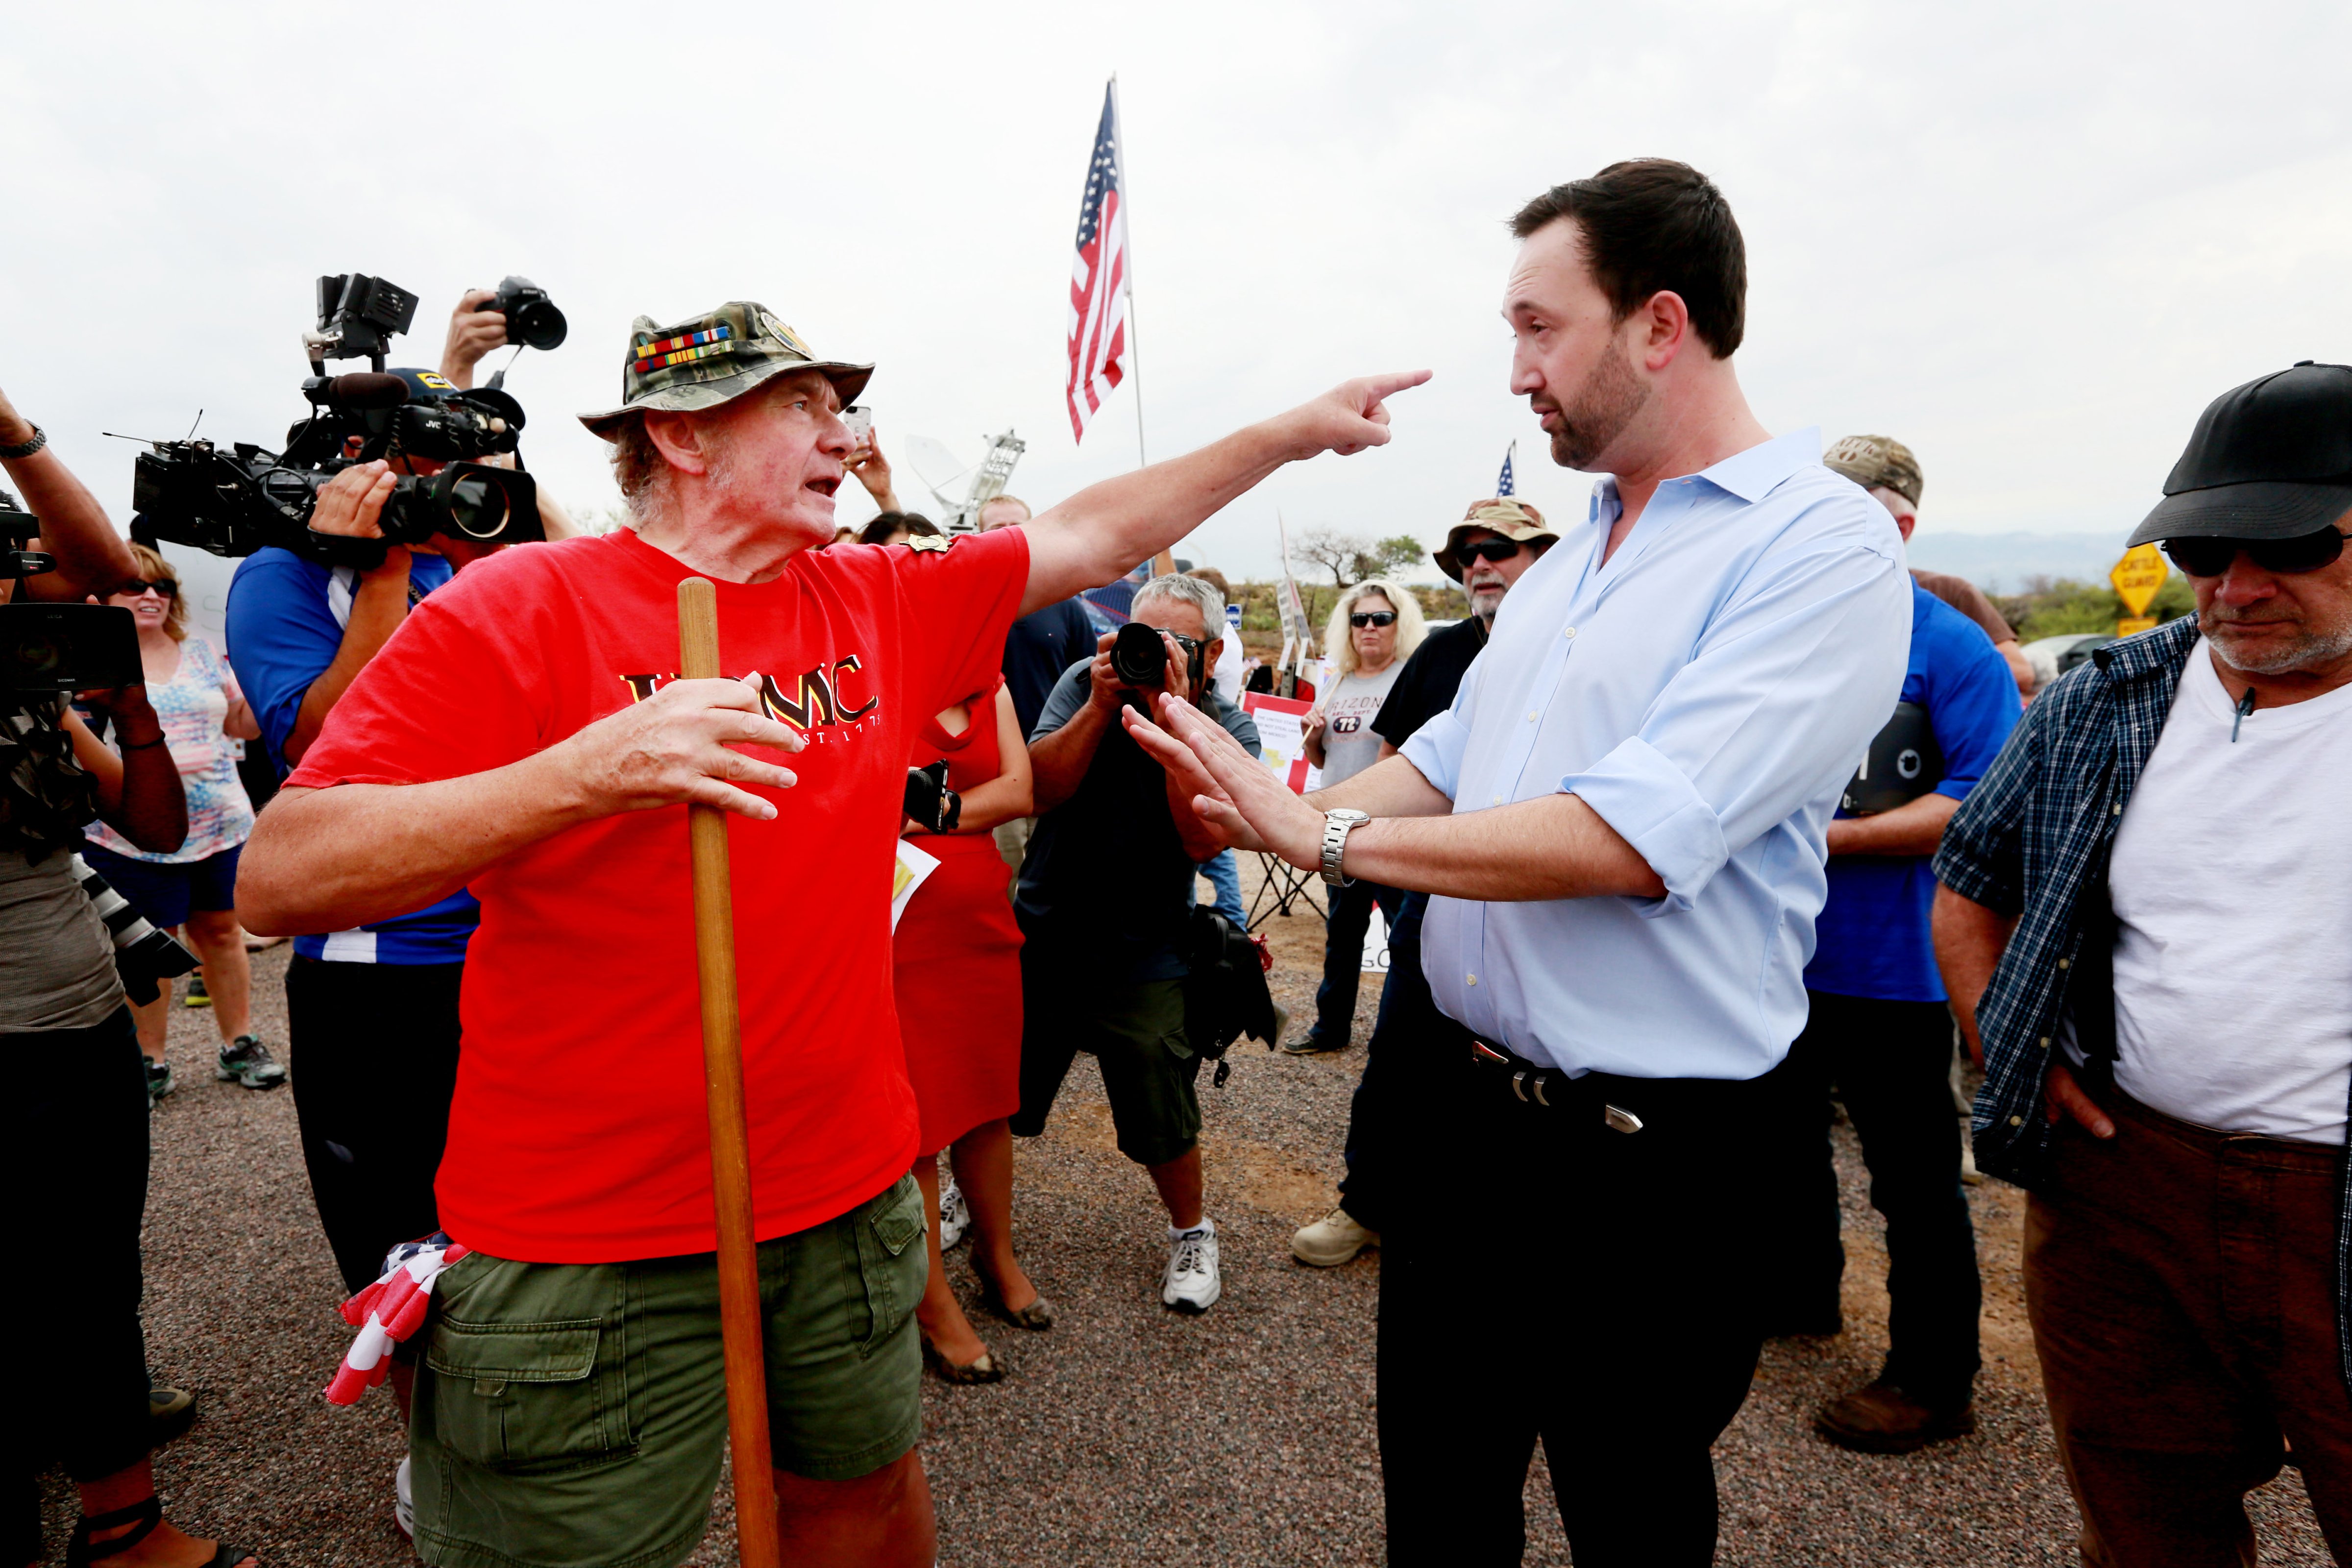 Adam Kwasman, a Tea Party patriot running for congress (R), has a heated discussion with an anti-immigration activist during a protest along Mt. Lemmon Road in anticipation of buses carrying  illegal immigrants on July 15, 2014 in Oracle, Arizona. (Sandy Huffaker—Getty Images)